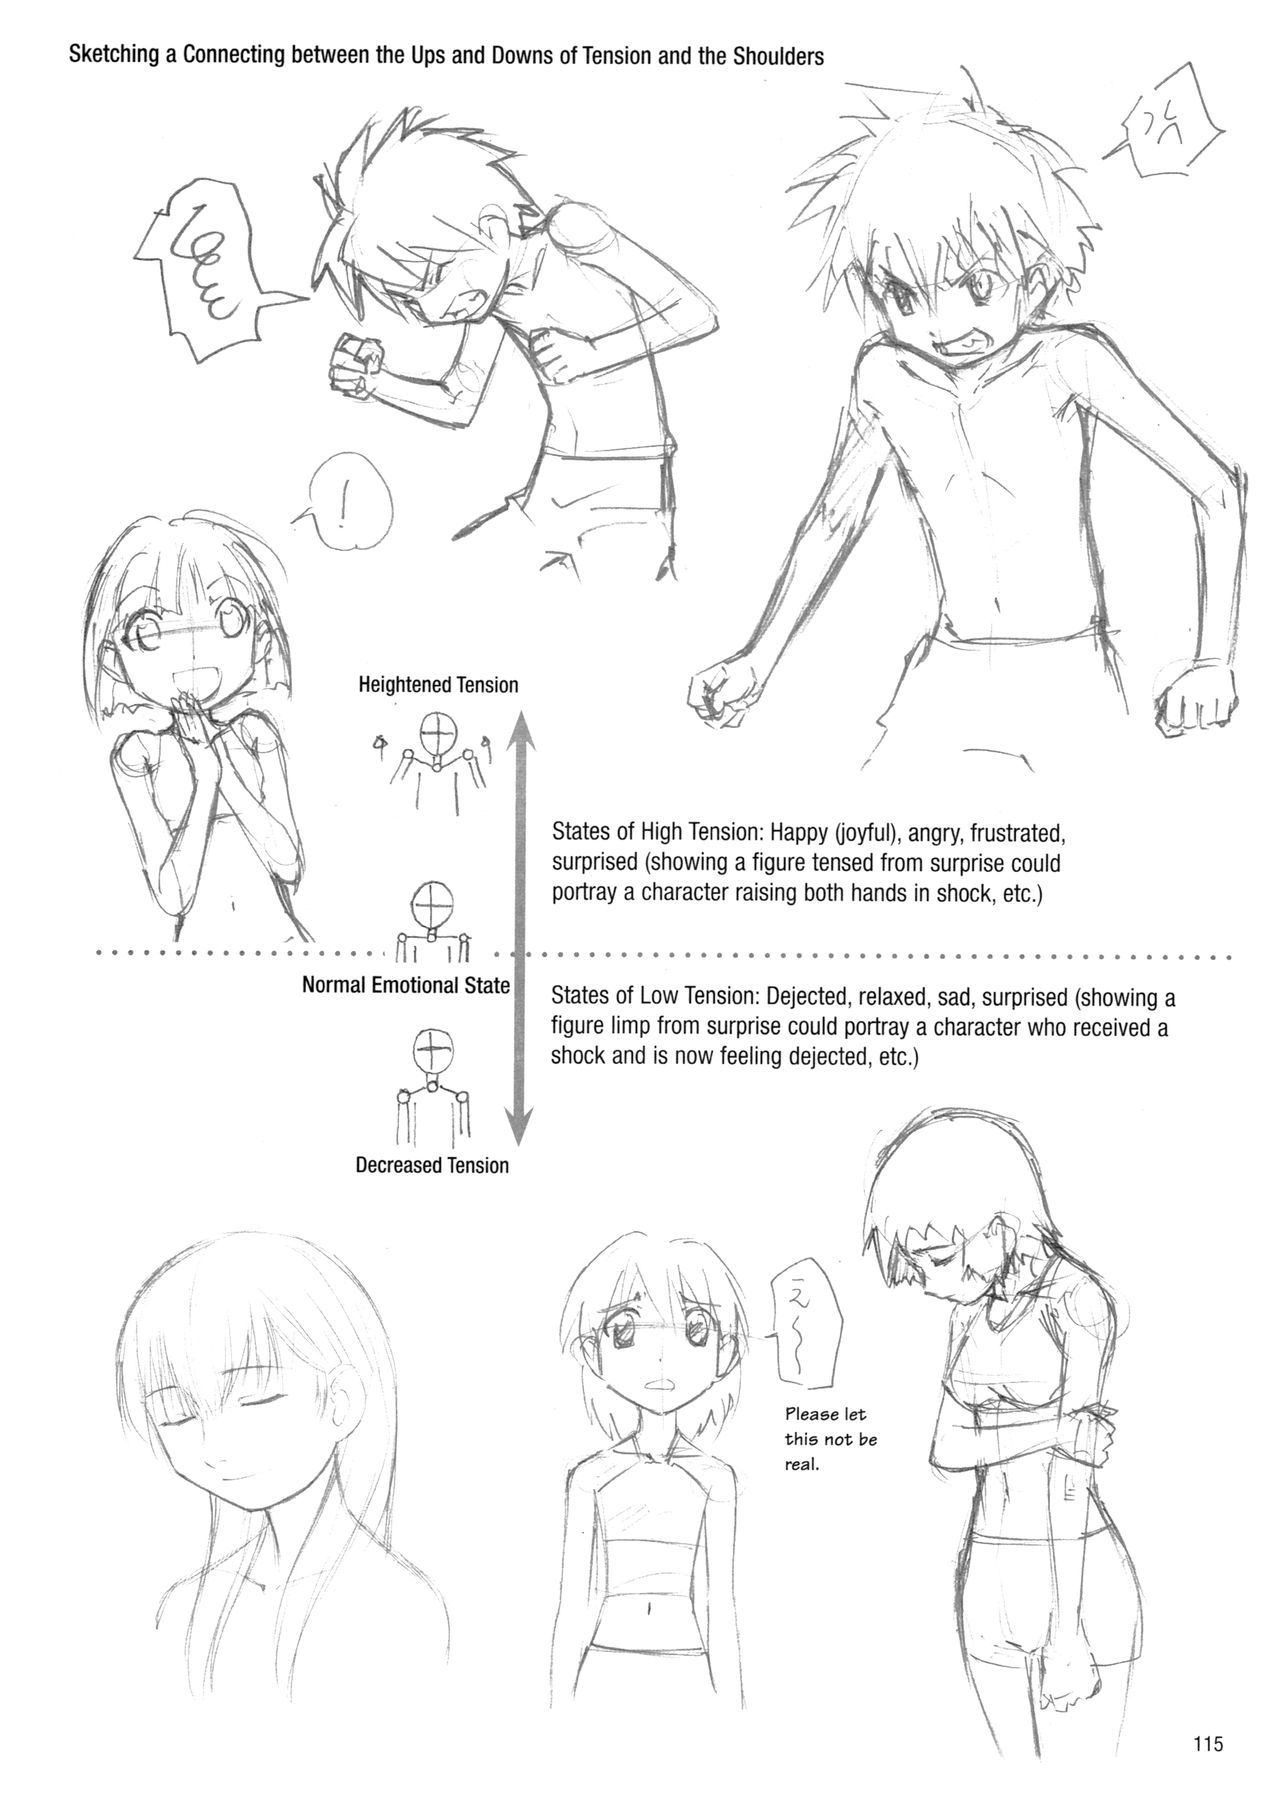 Sketching Manga-Style Vol. 3 - Unforgettable Characters 114